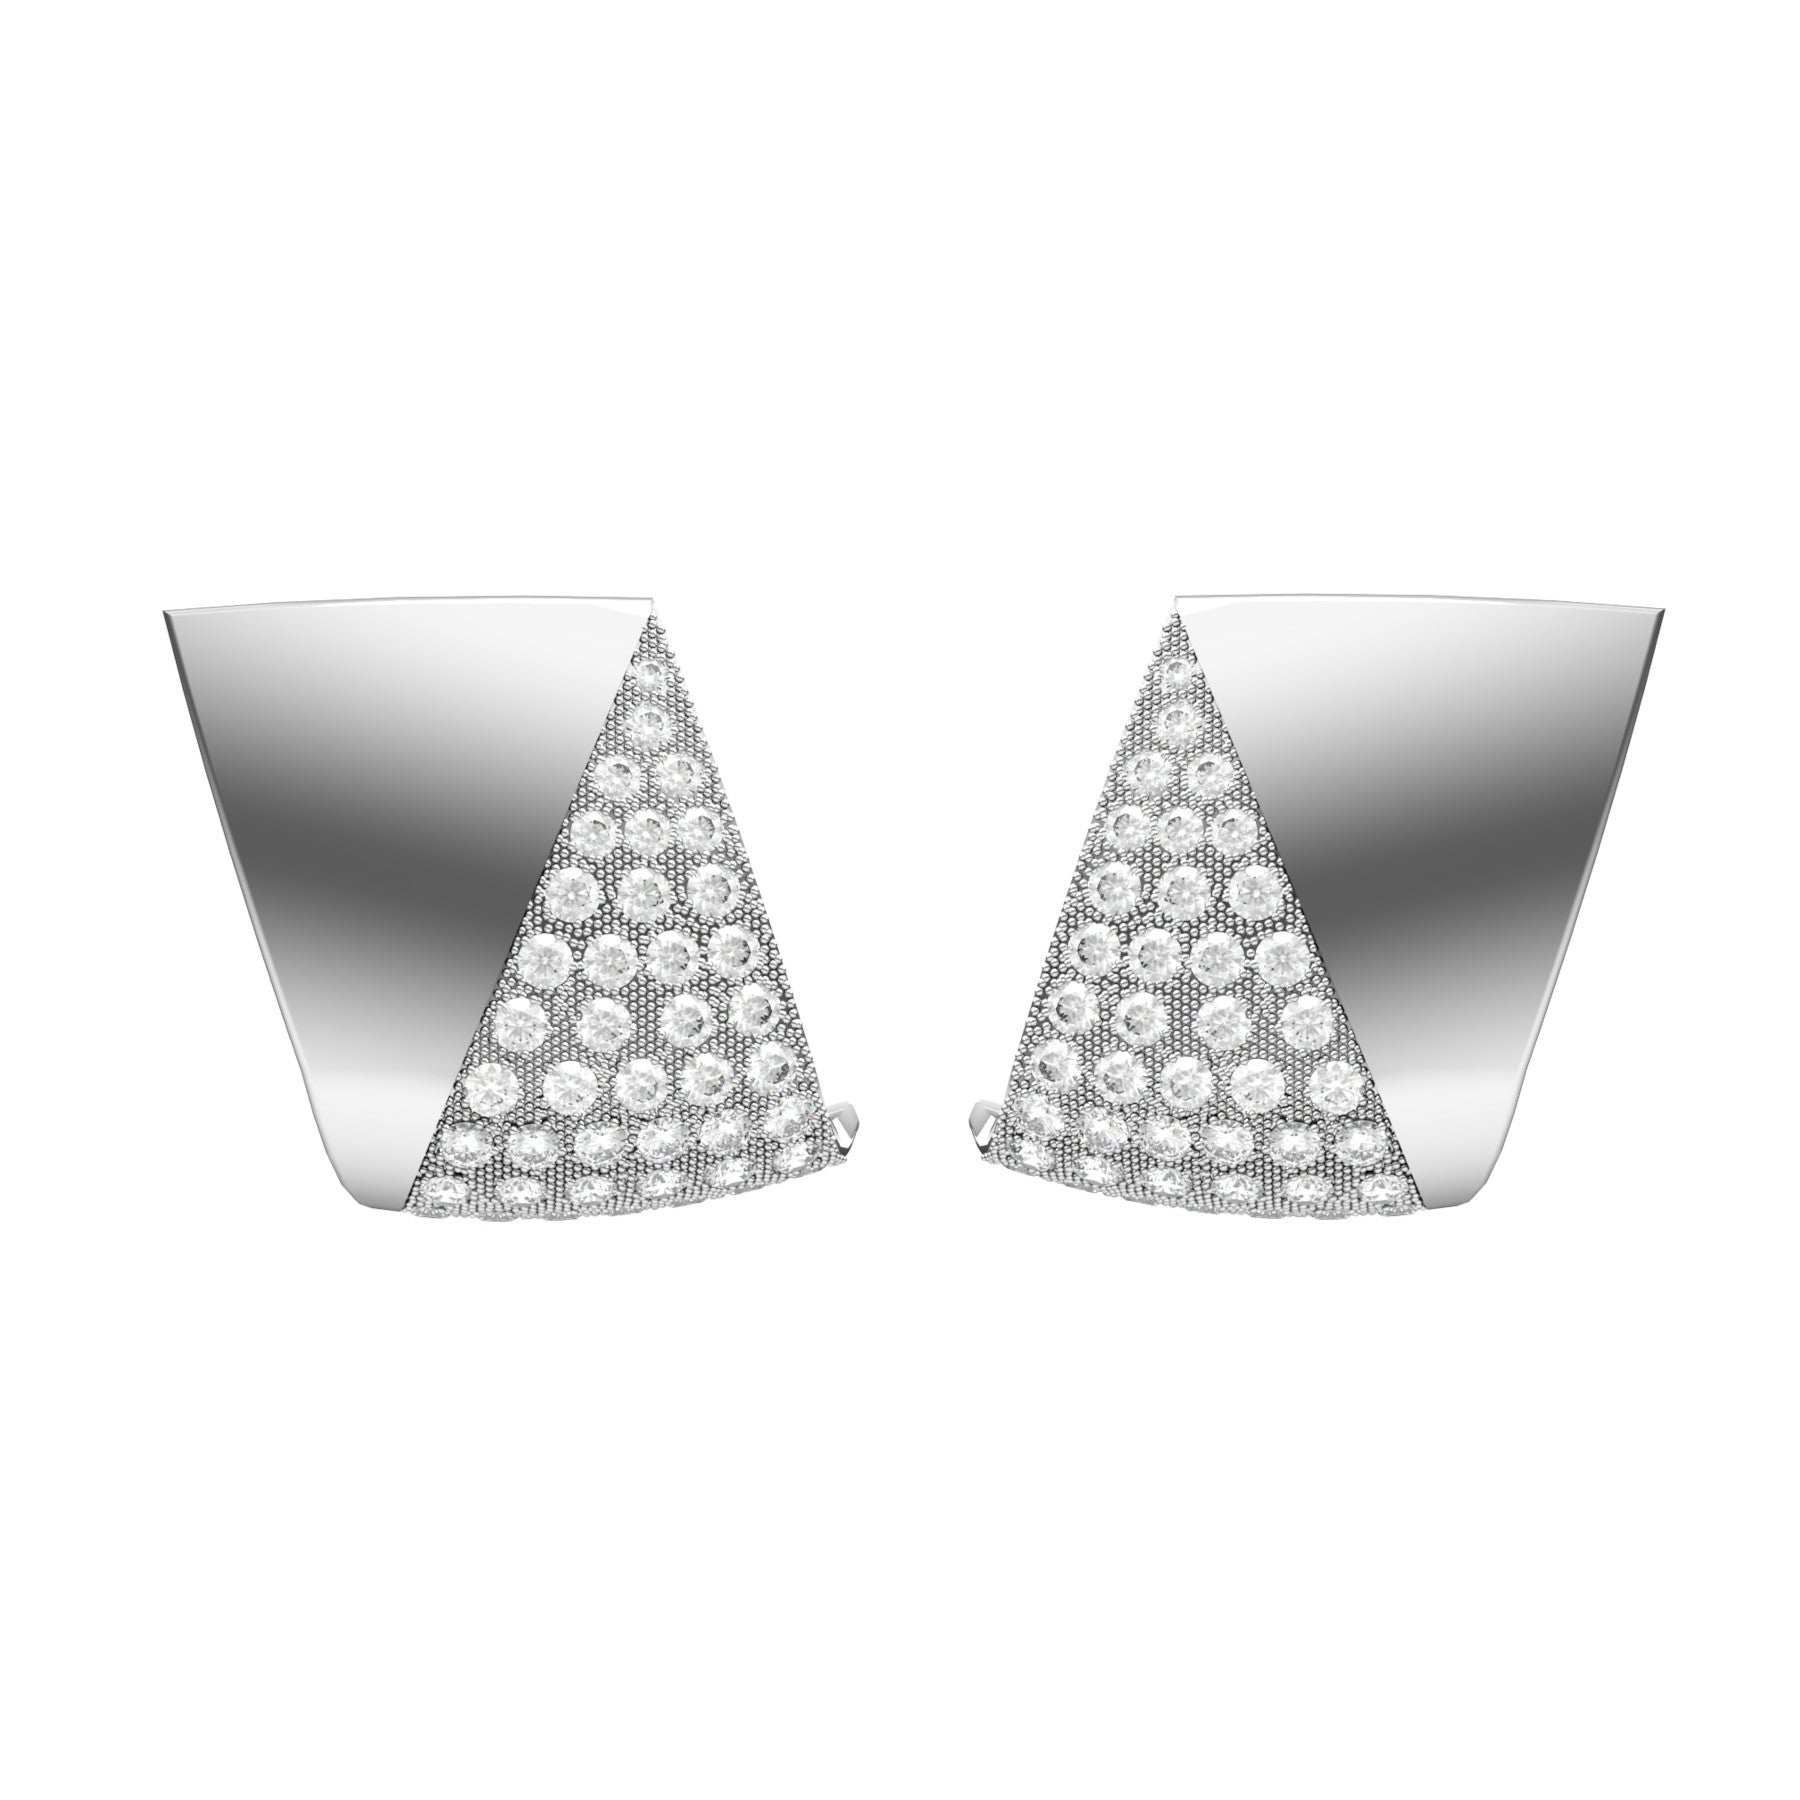 shield earrings, round natural diamonds, 18 K white gold, weight about 13,0 g. (0.46 oz) size 21,4x18,8x6,7 mm